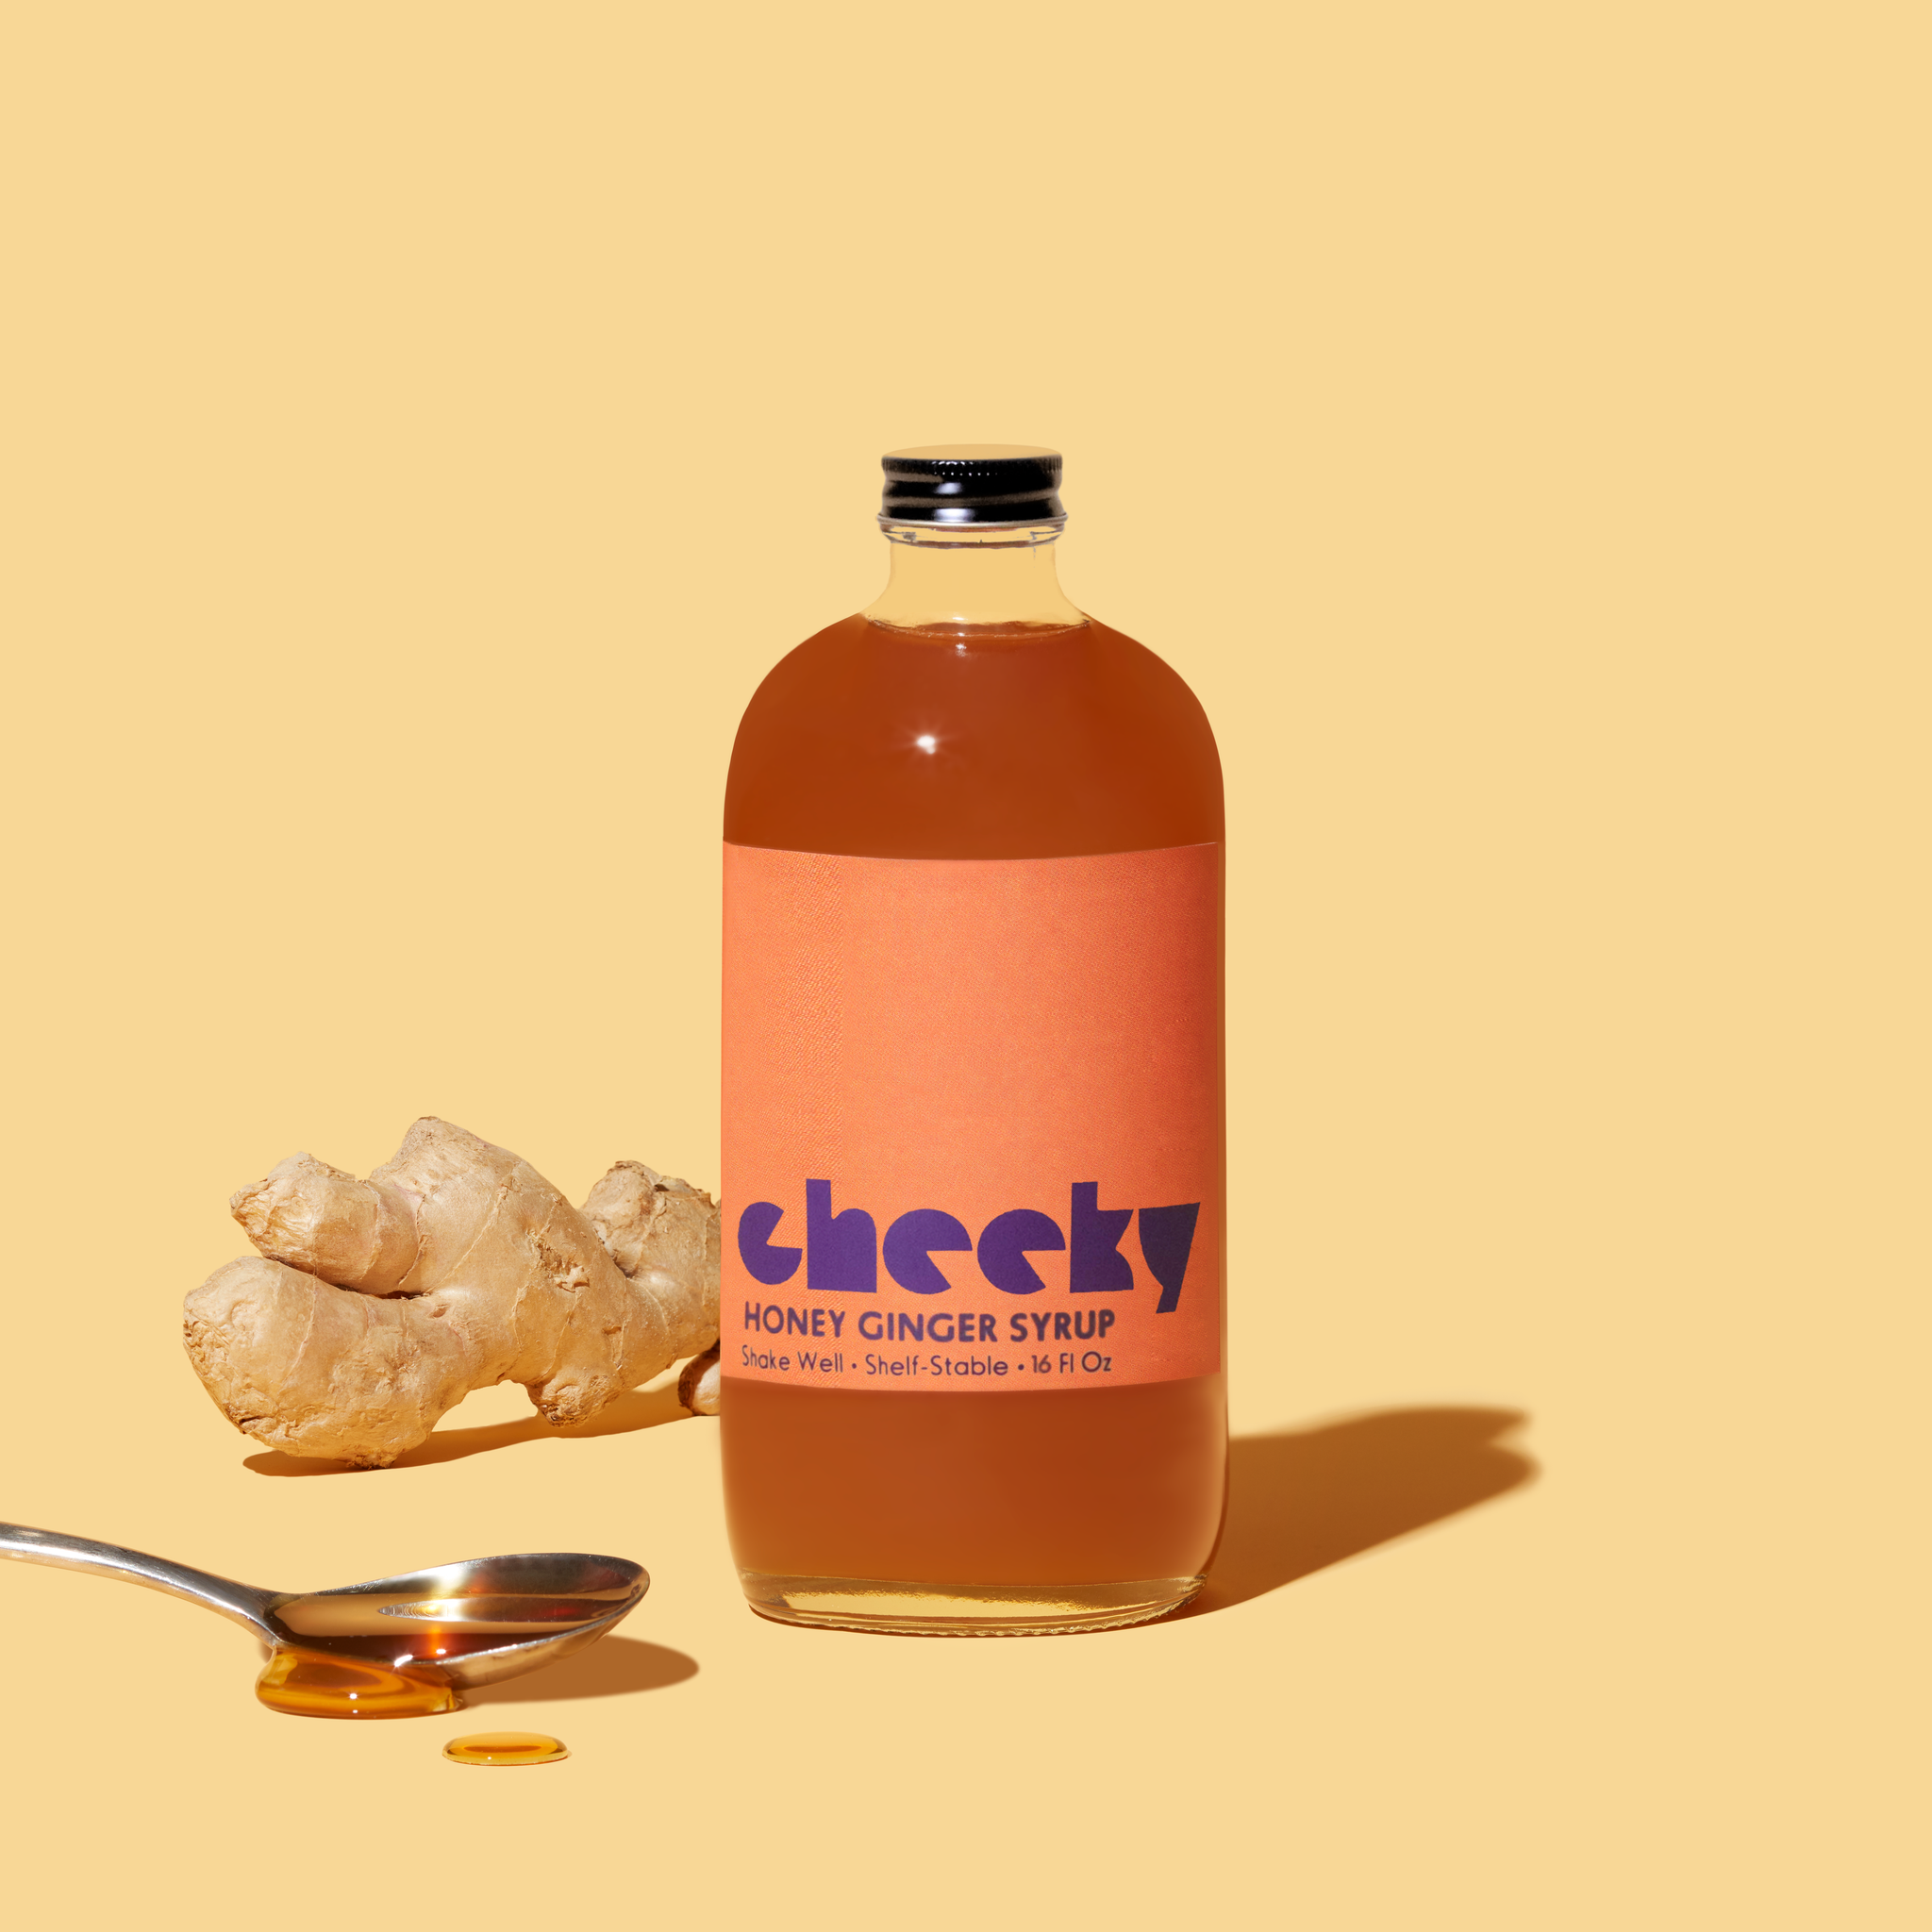 Cheeky Honey Ginger Syrup